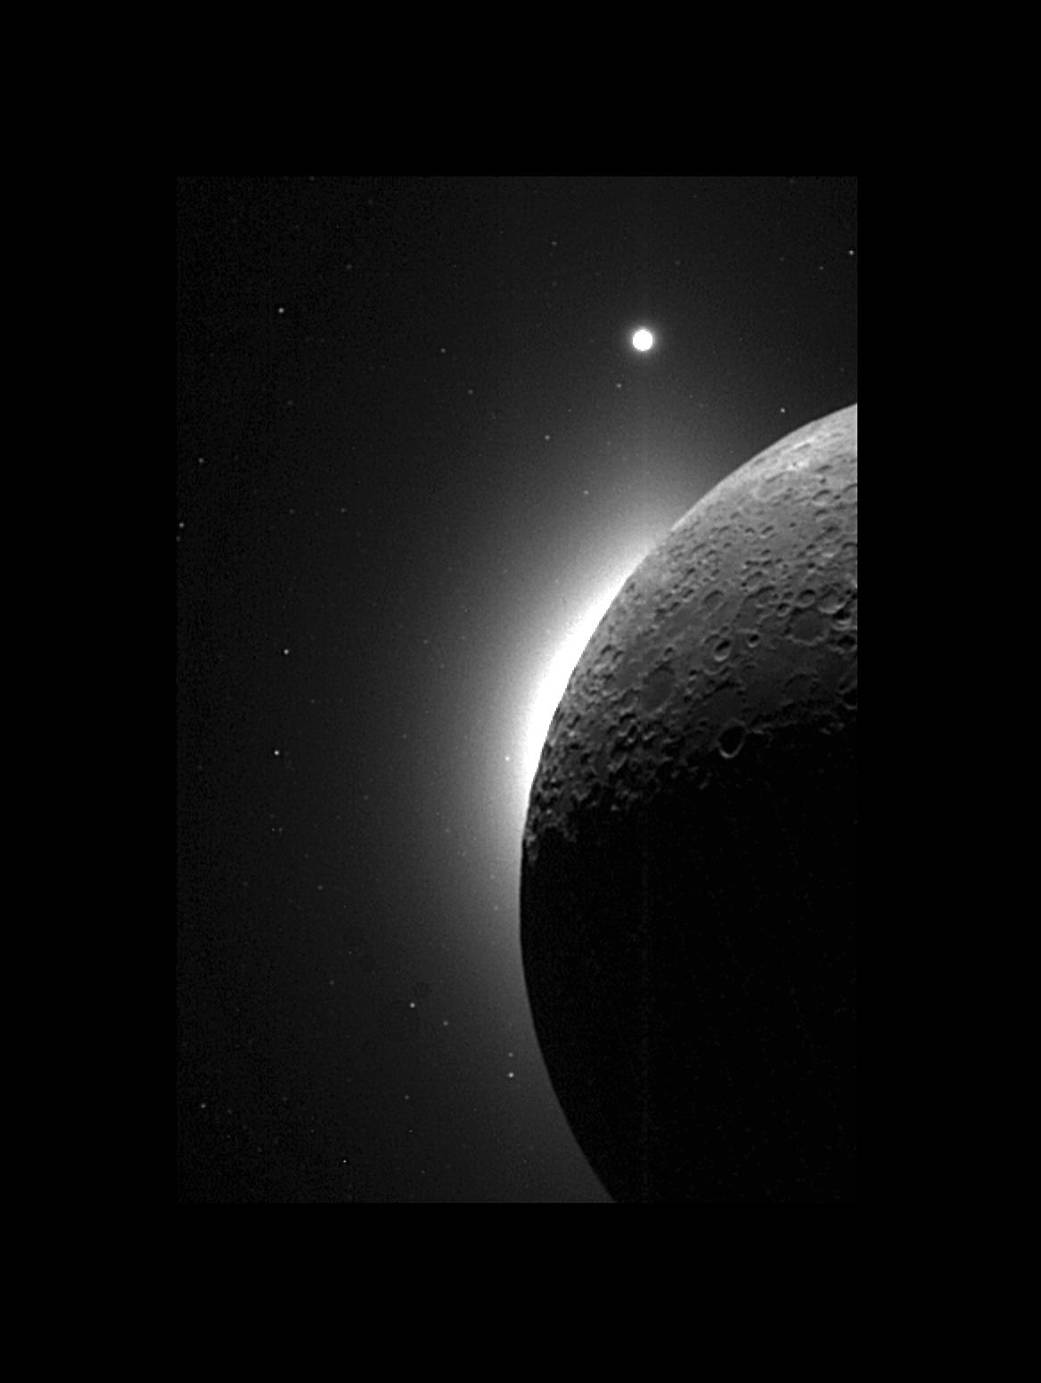 Black and white image of the moon close up with Venus in distance